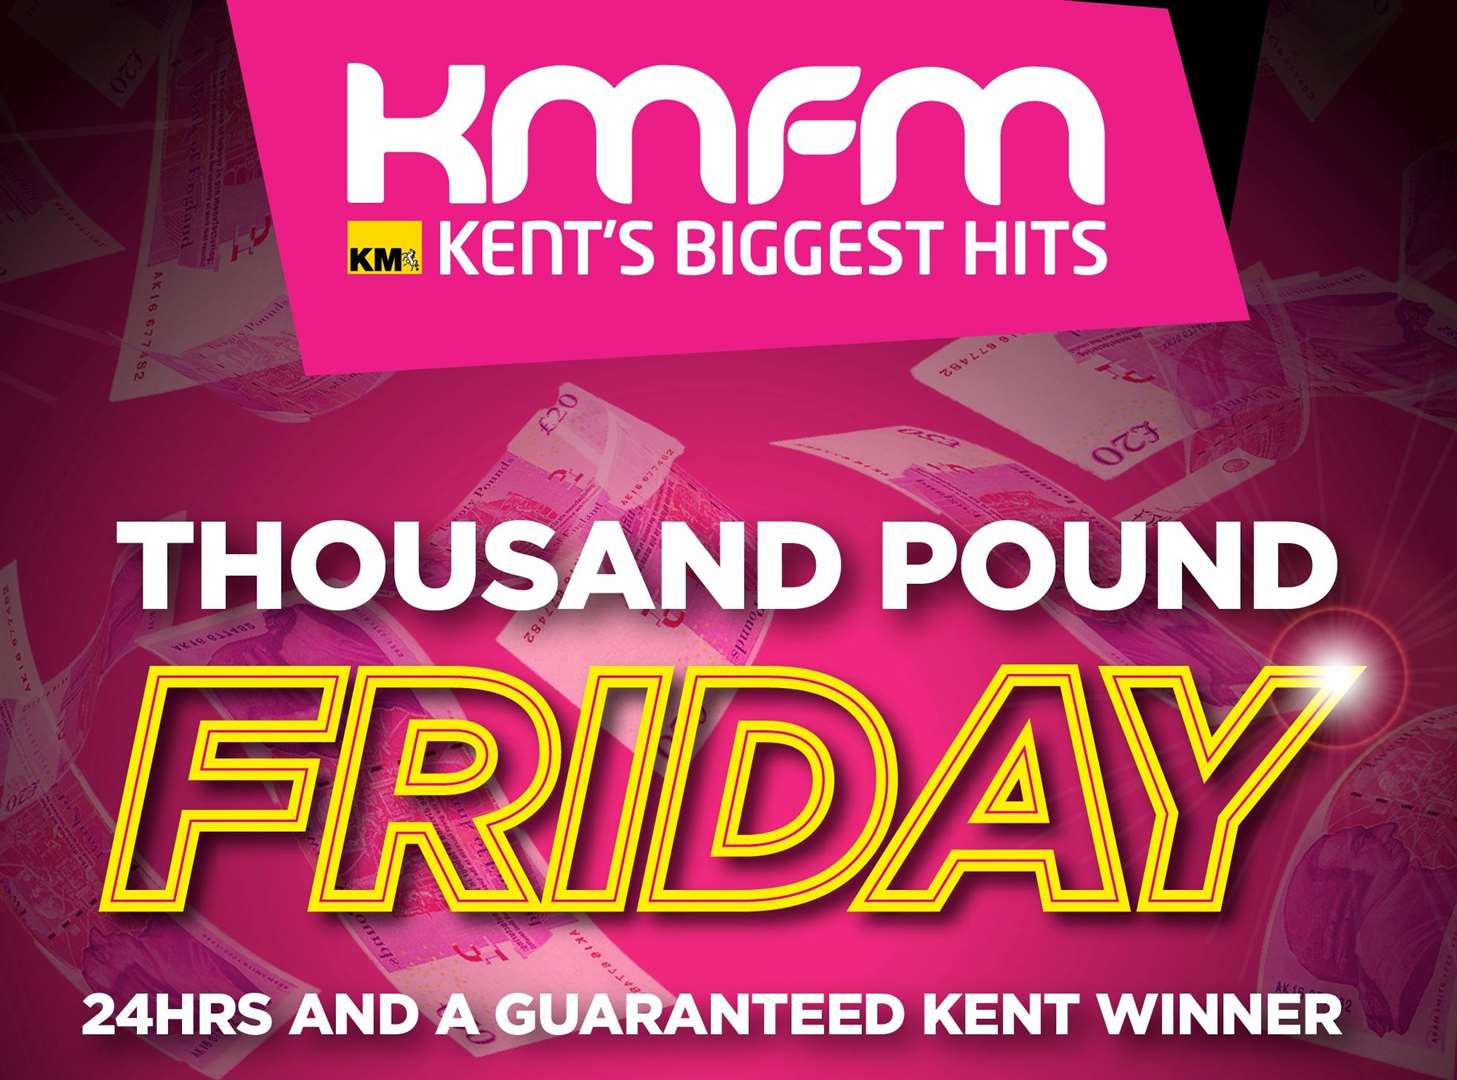 The latest Thousand Pound Friday winner has been revealed